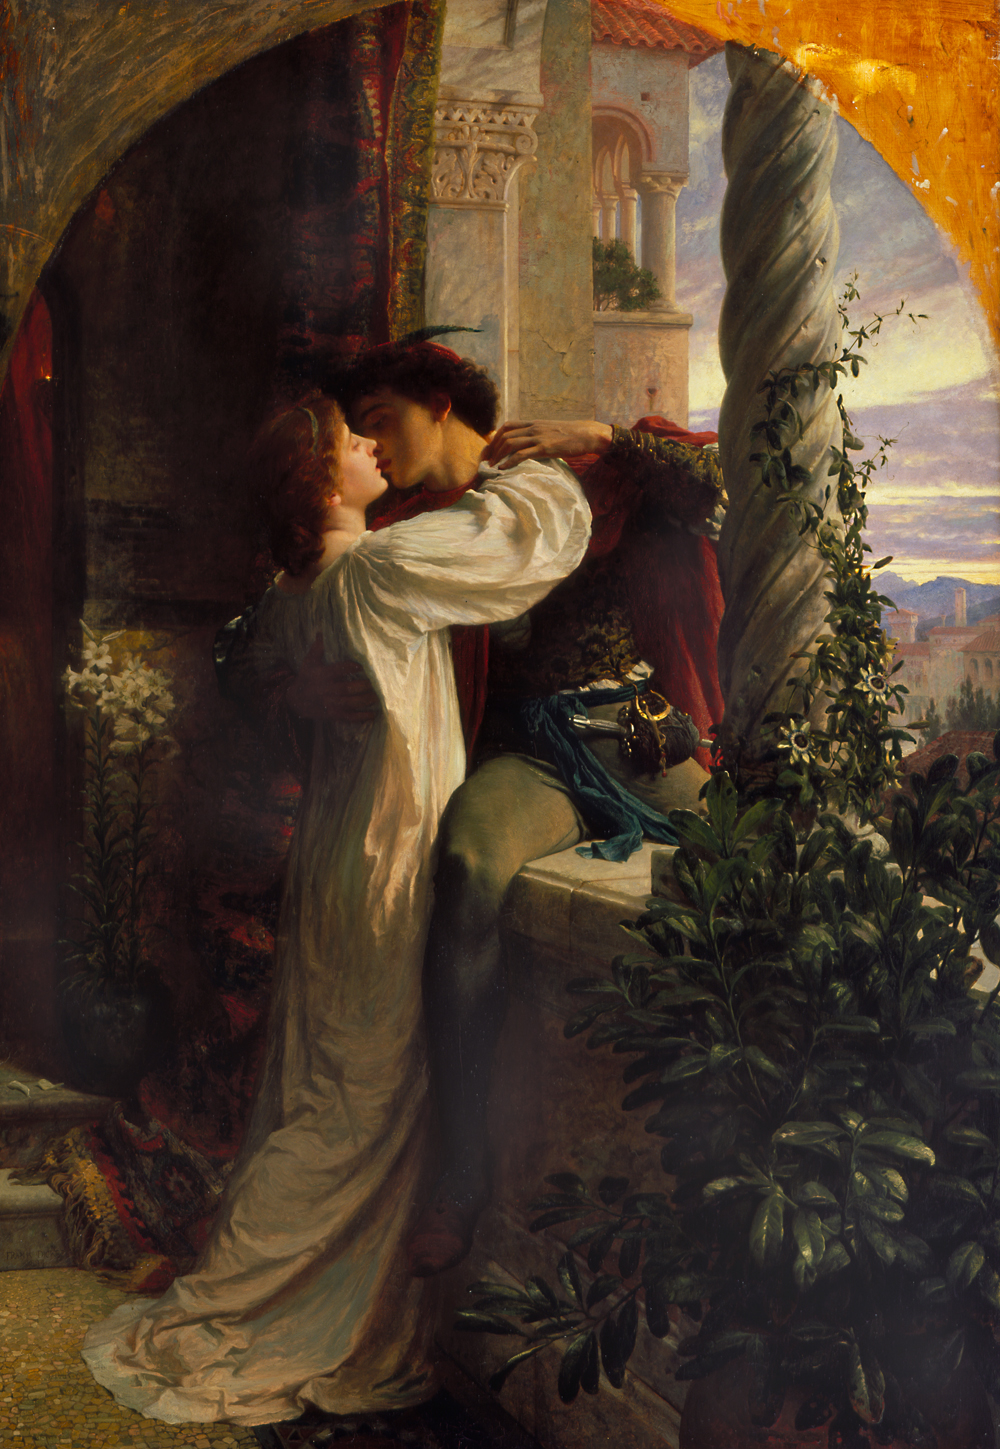 A man seated on the ledge of a castle balcony leaning in to kiss a woman